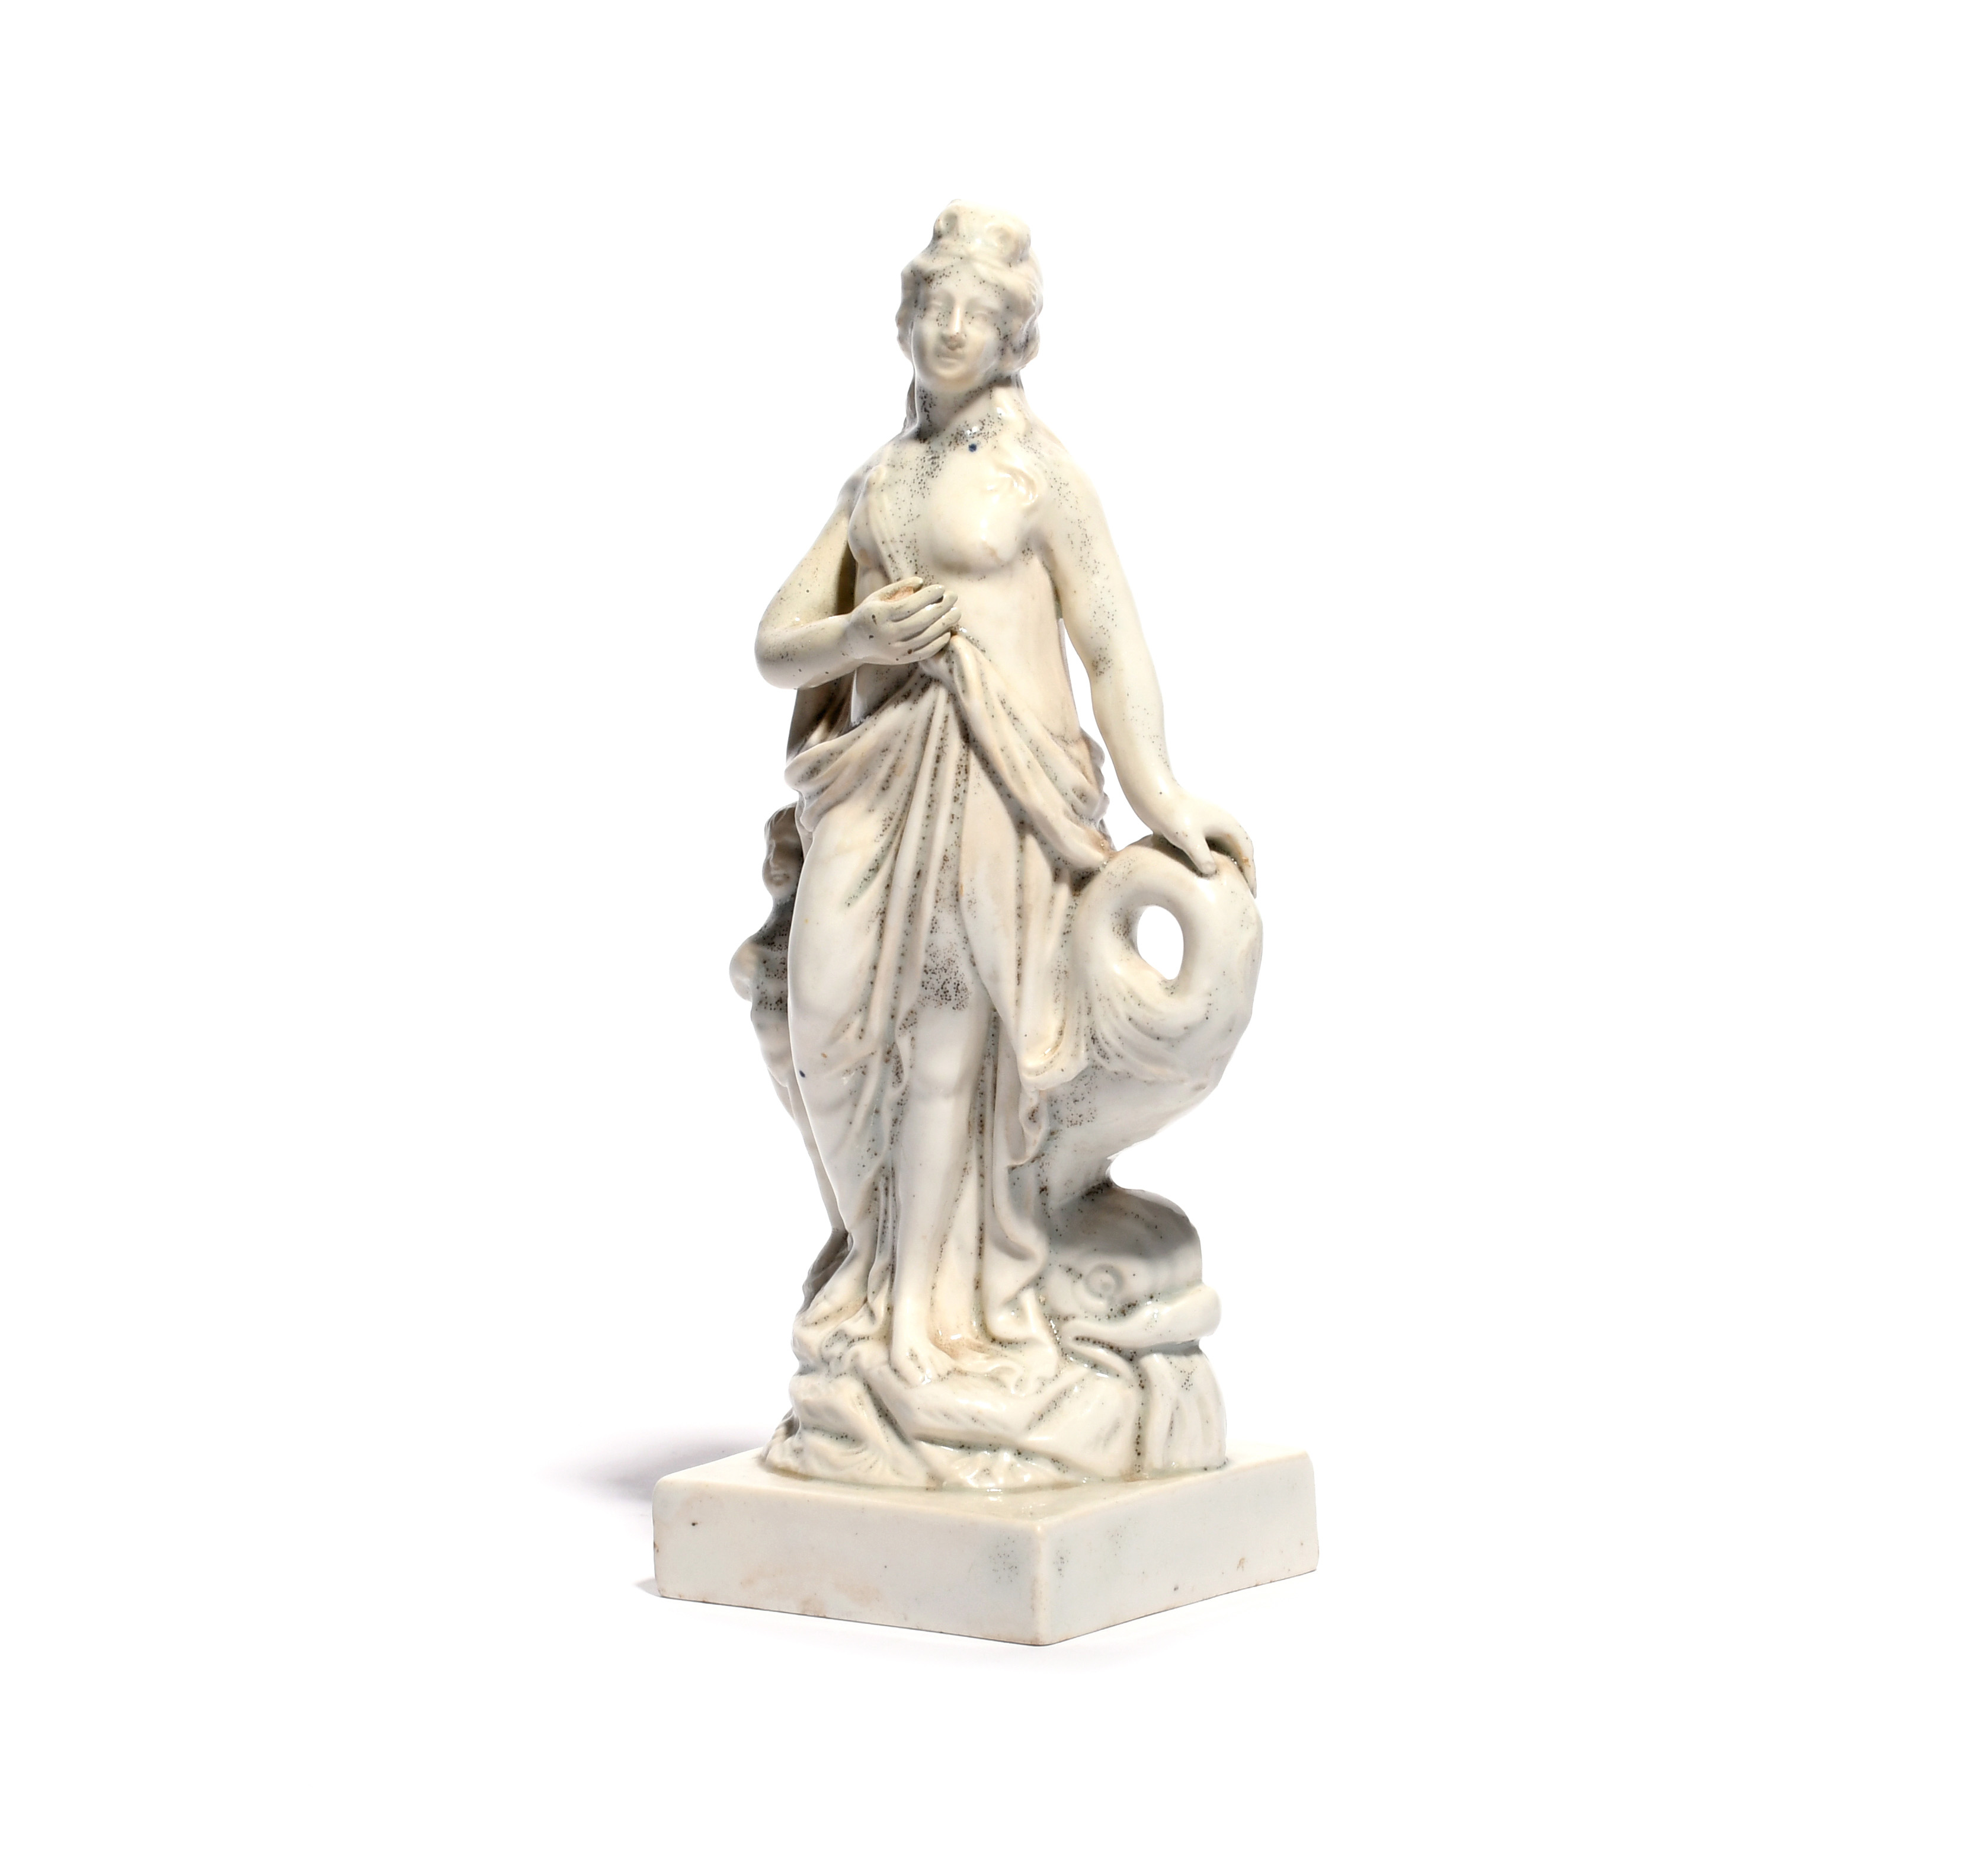 A Staffordshire porcelain figure of Venus late 18th century, standing and resting one hand on the - Image 3 of 3